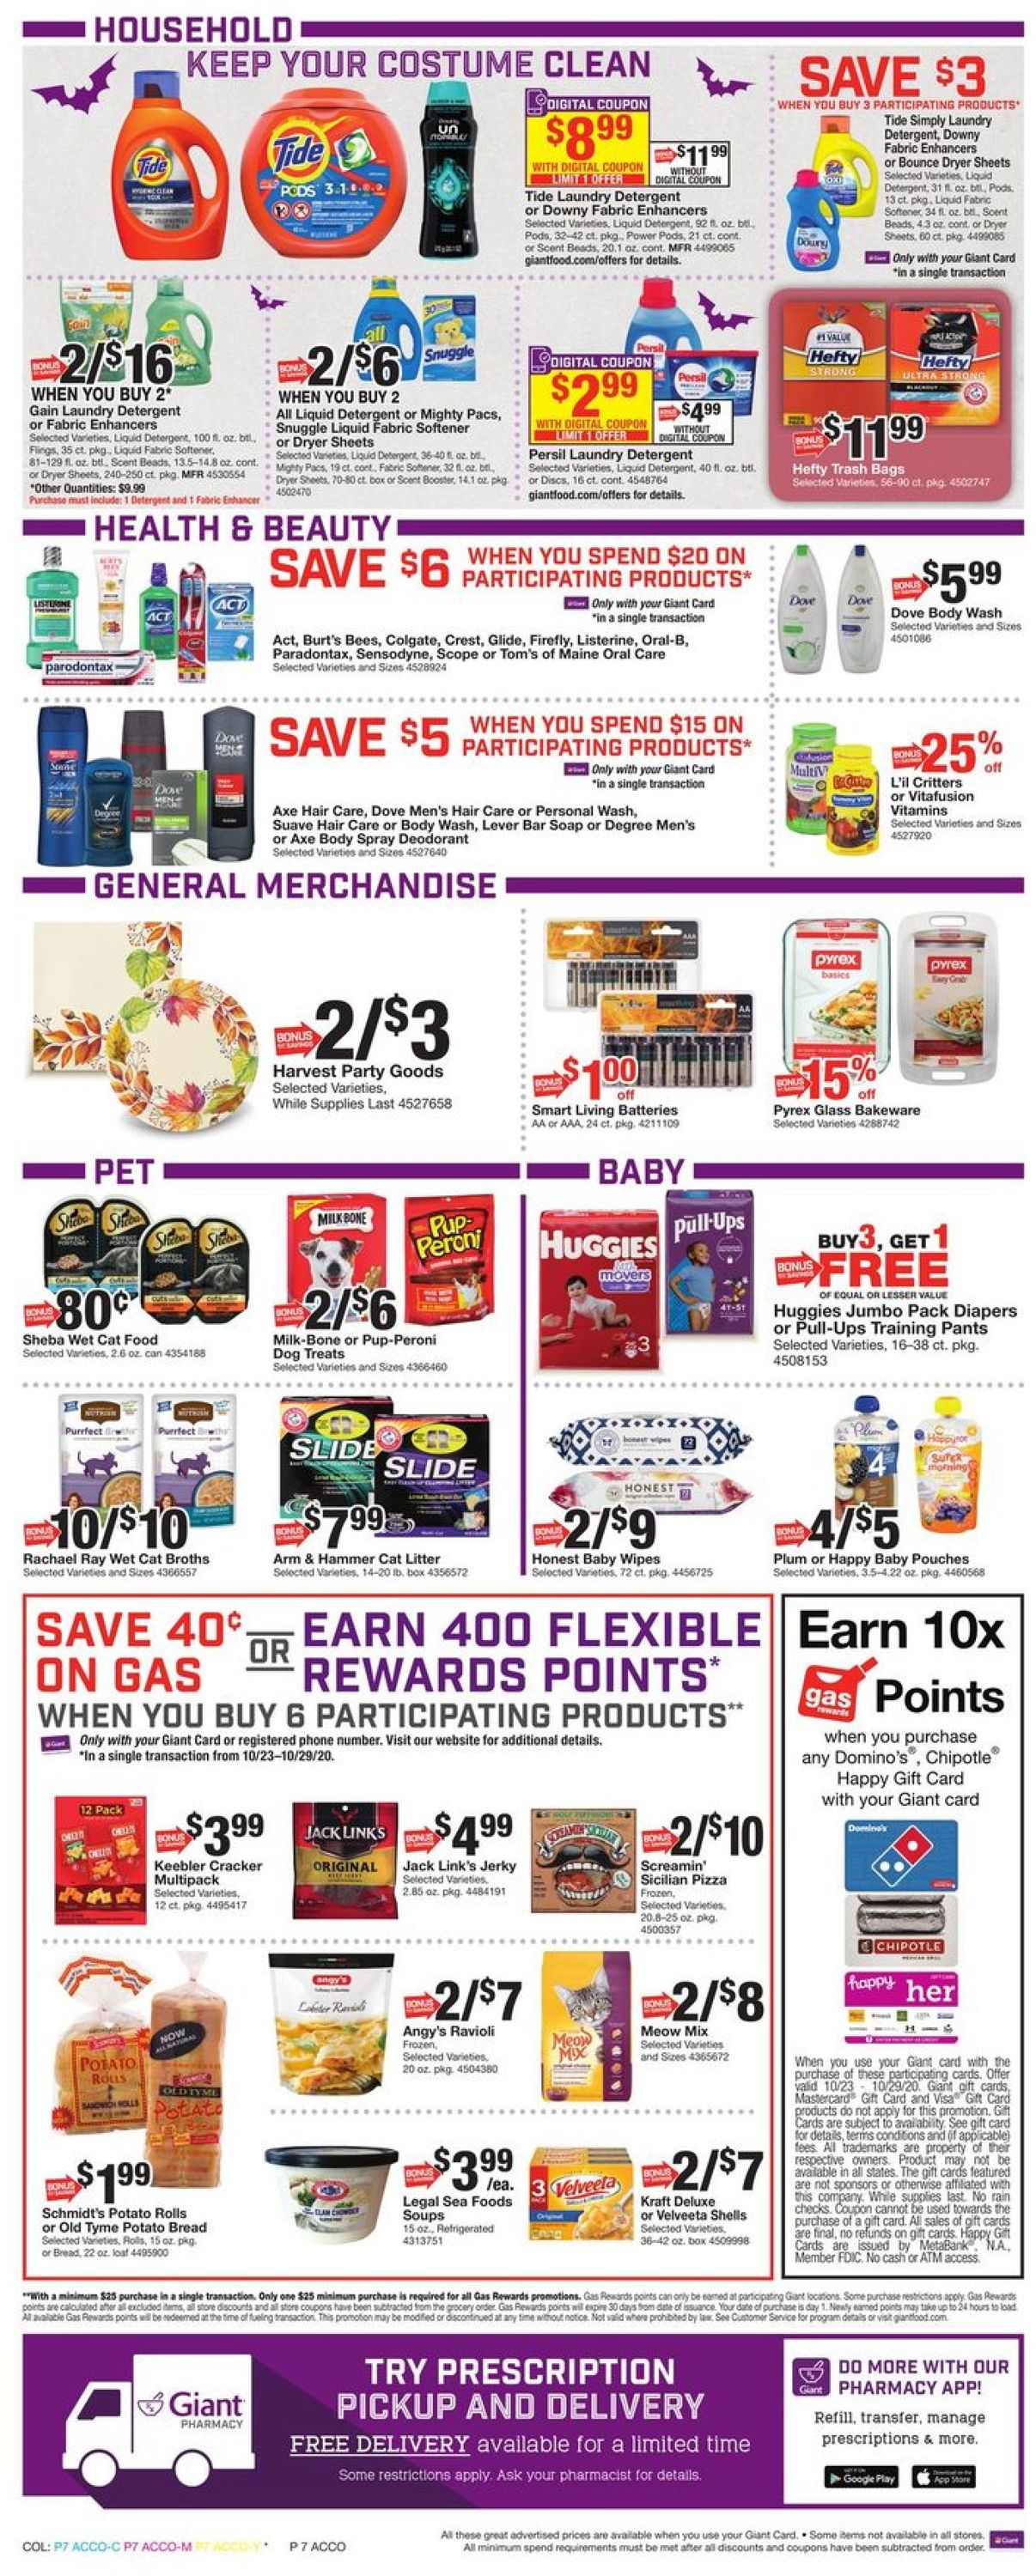 Giant Food Ad from 10/23/2020